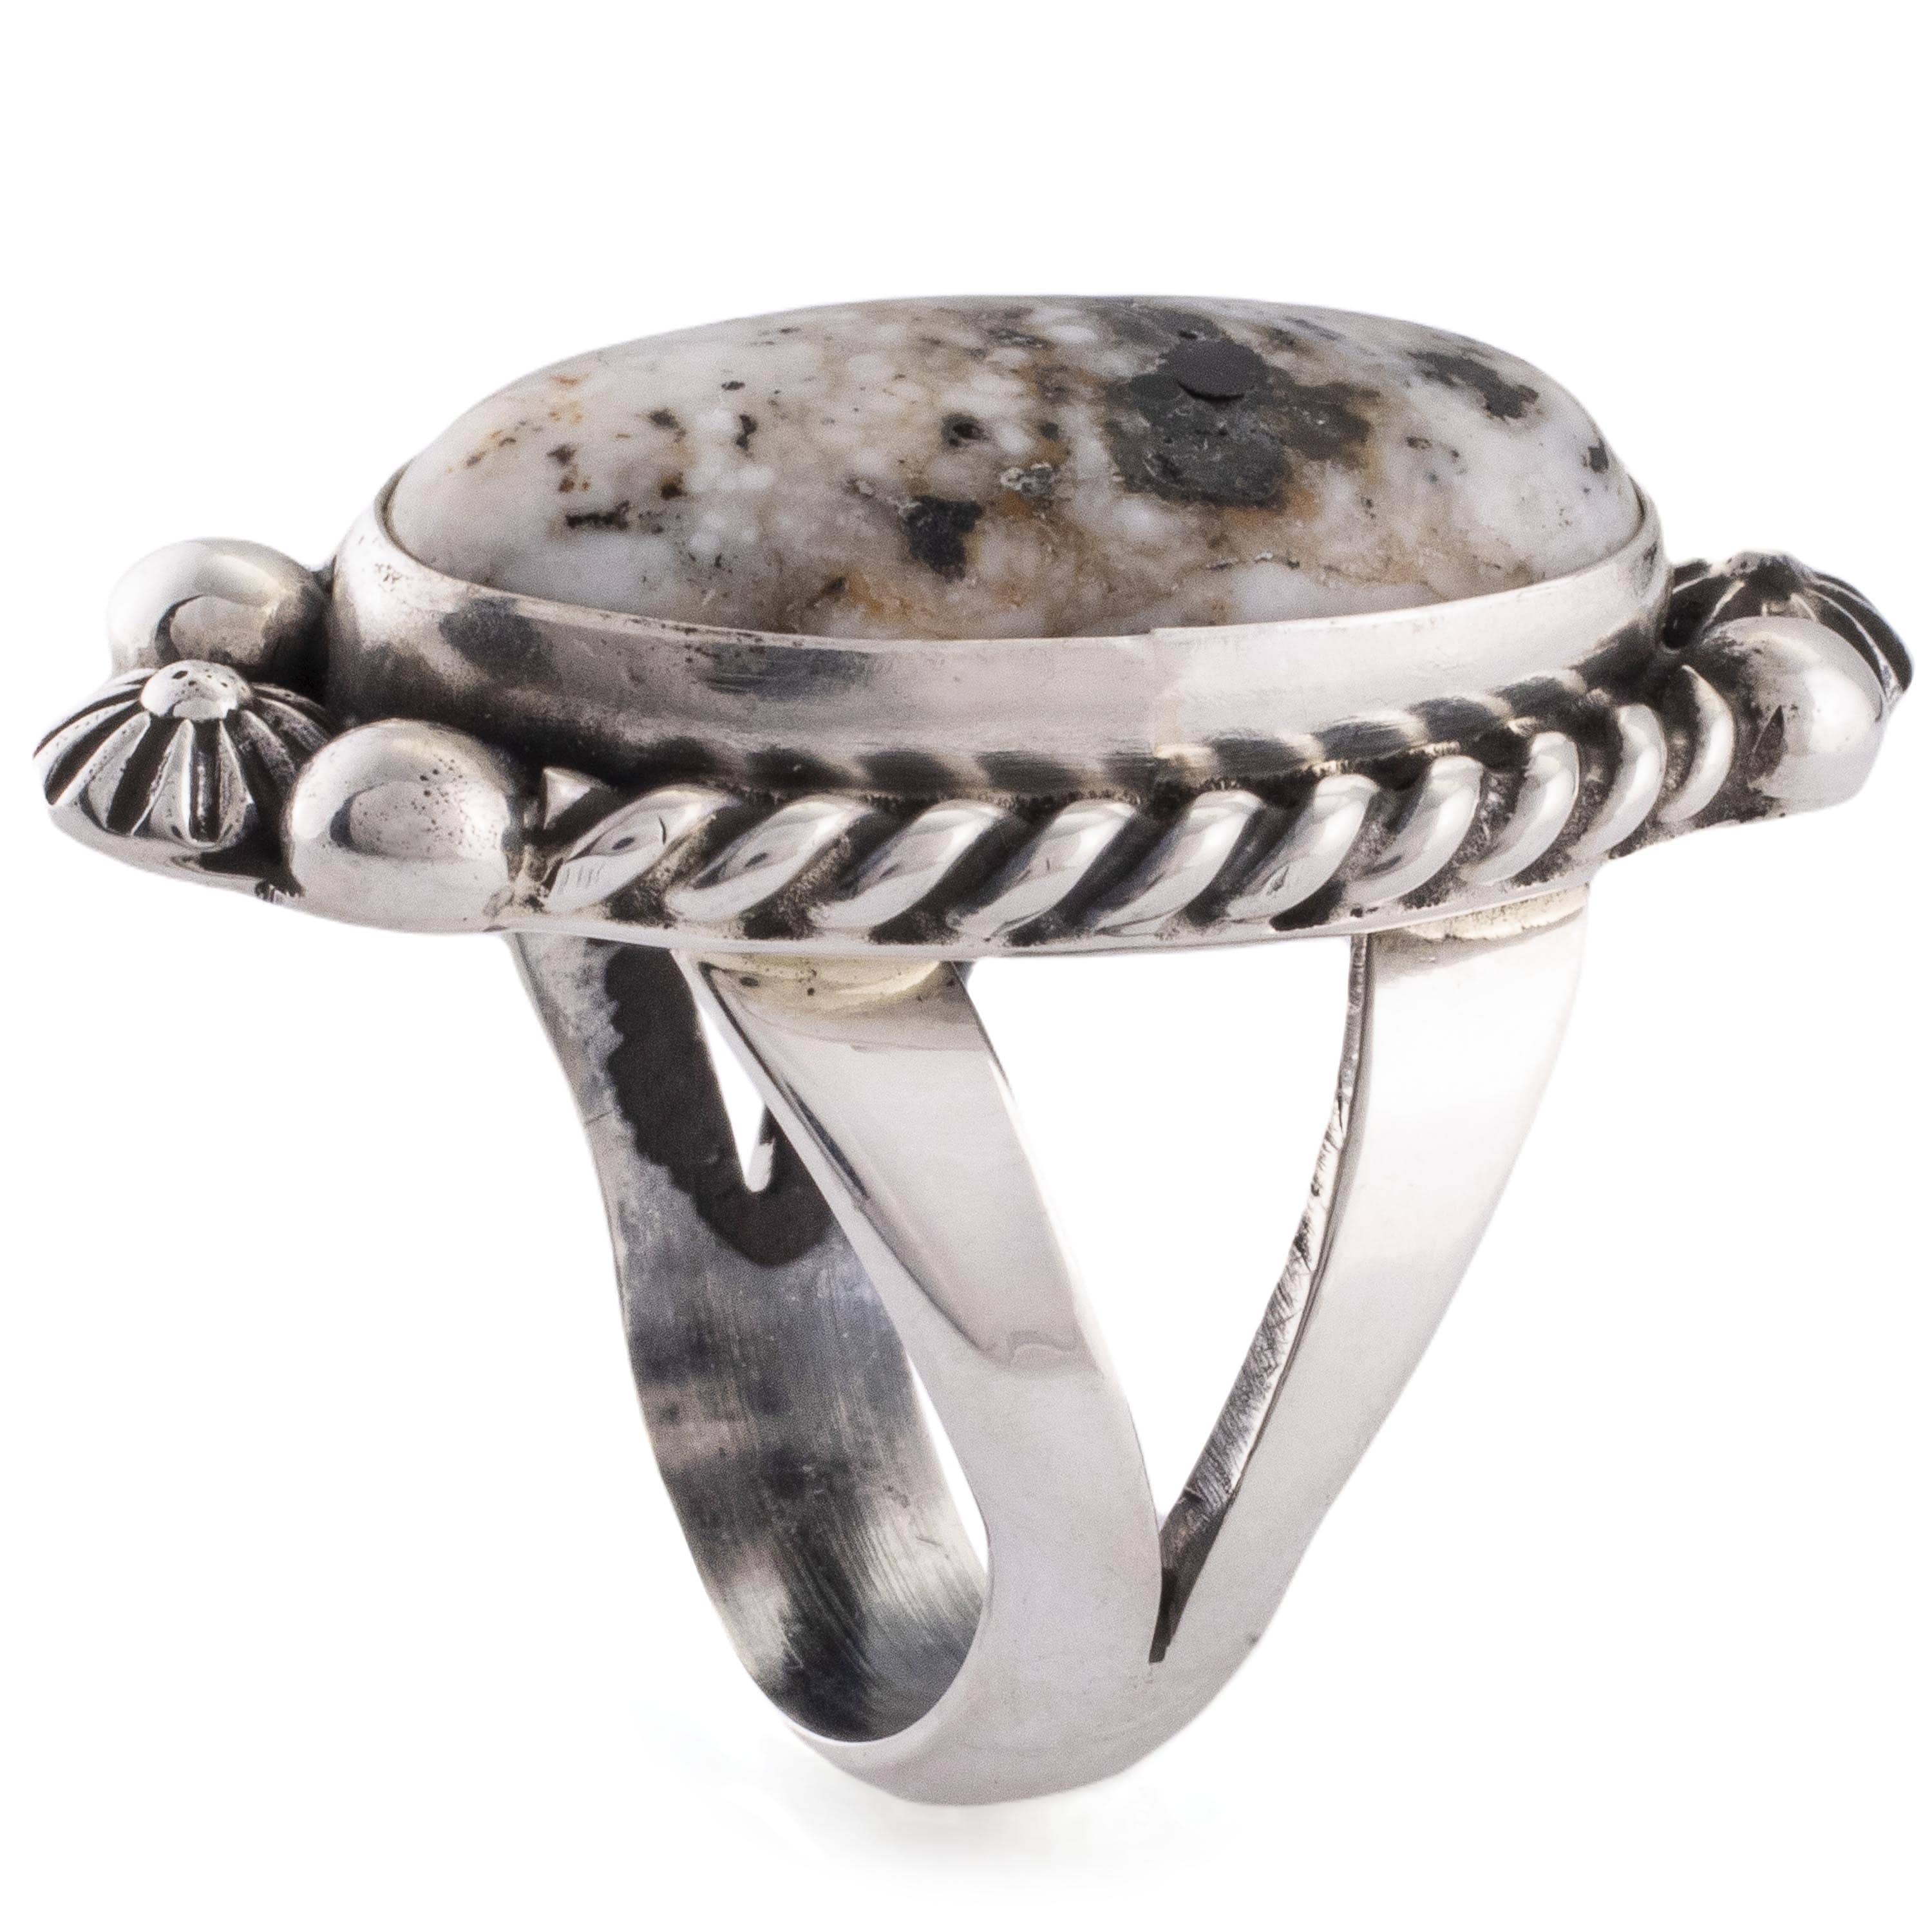 Kalifano Native American Jewelry 9 Eddie Secatero Navajo White Buffalo Turquoise USA Native American Made 925 Sterling Silver Ring NAR800.032.9